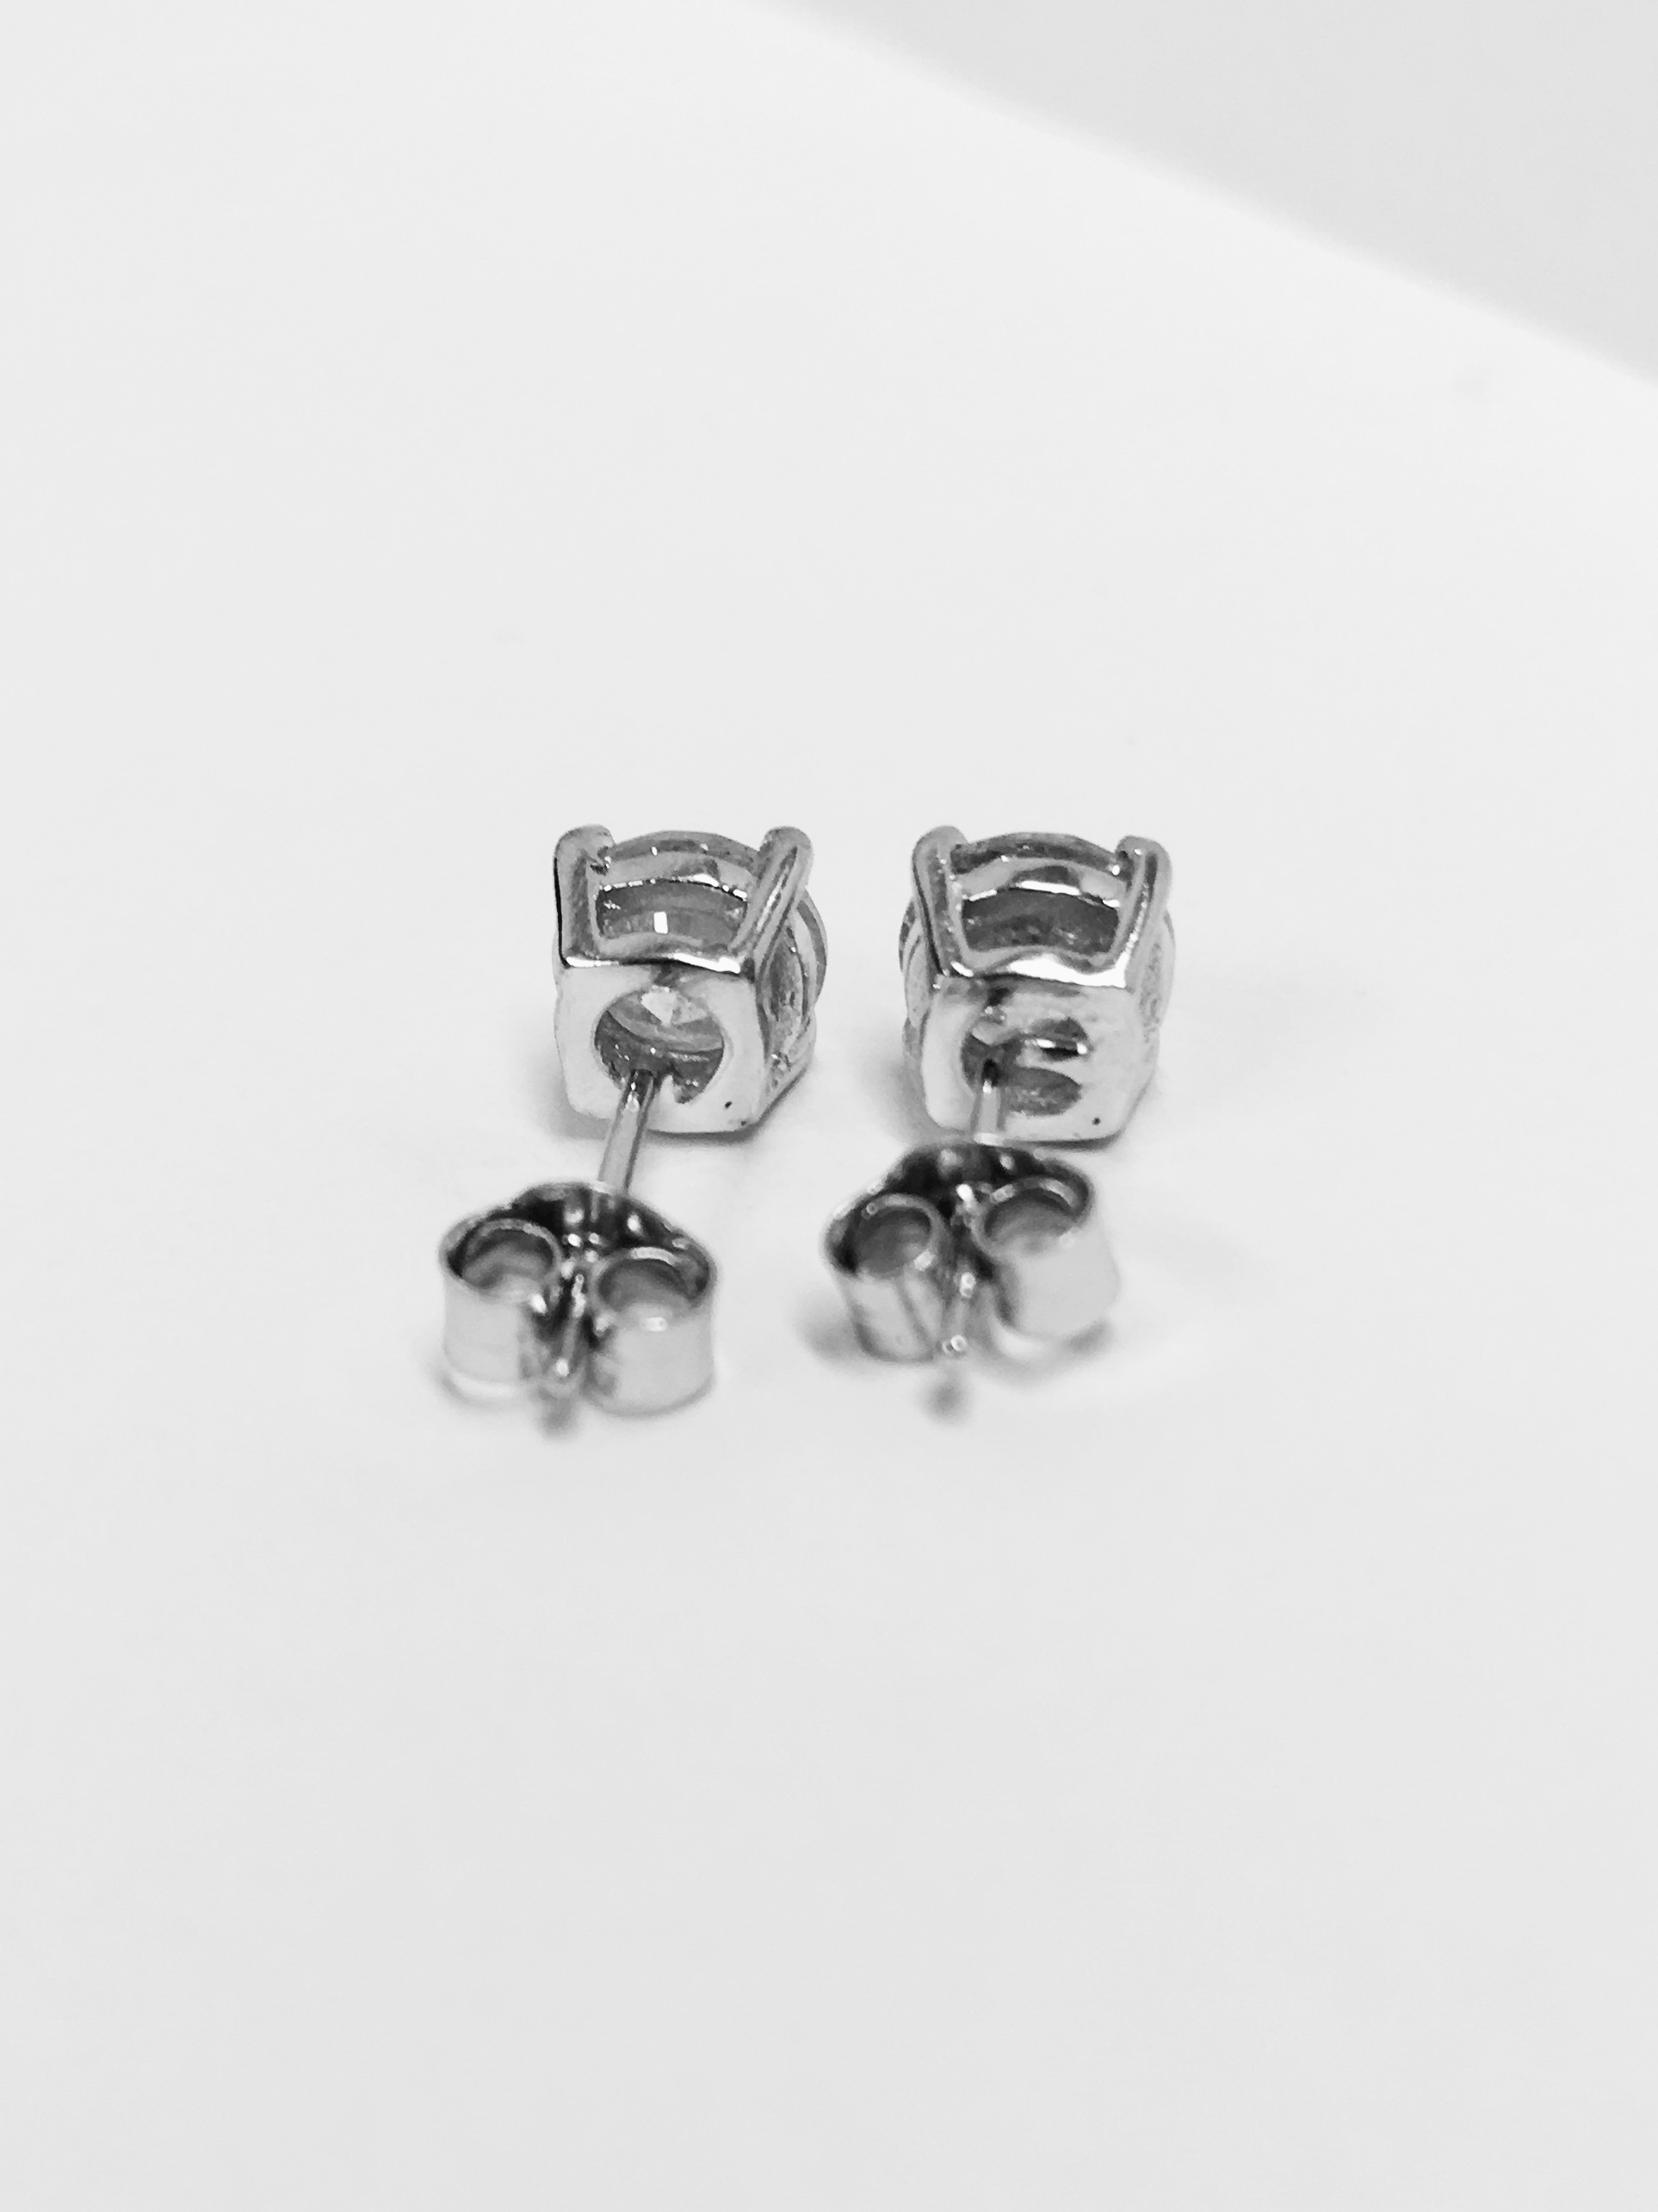 1ct diamond solitaire earrings - Image 21 of 24